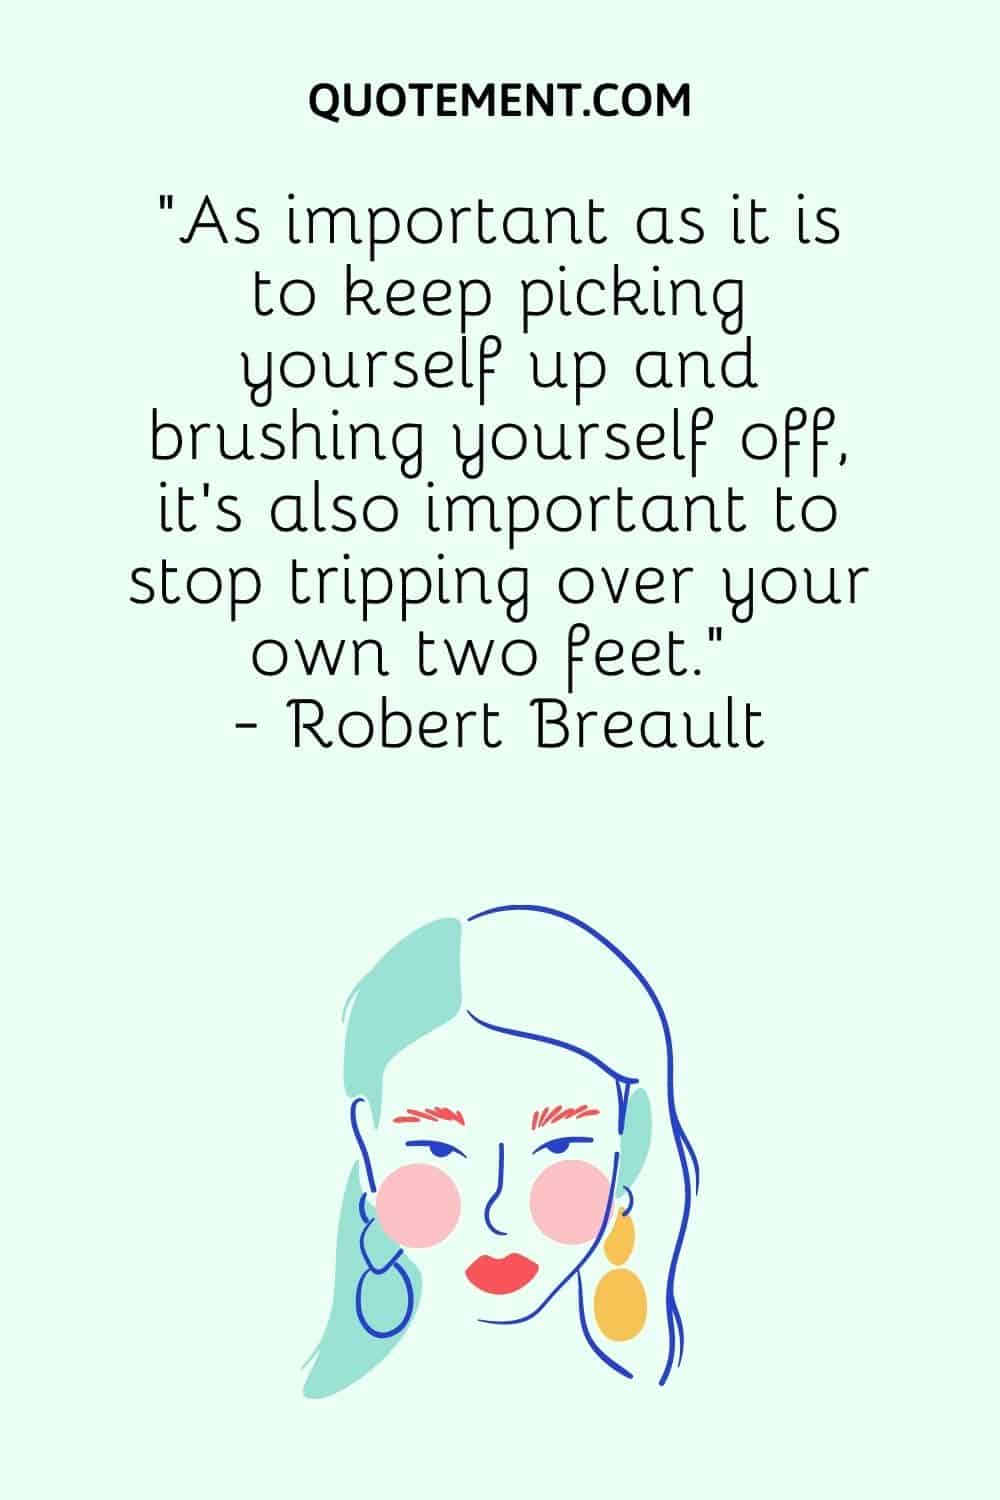 “As important as it is to keep picking yourself up and brushing yourself off, it’s also important to stop tripping over your own two feet.” - Robert Breault